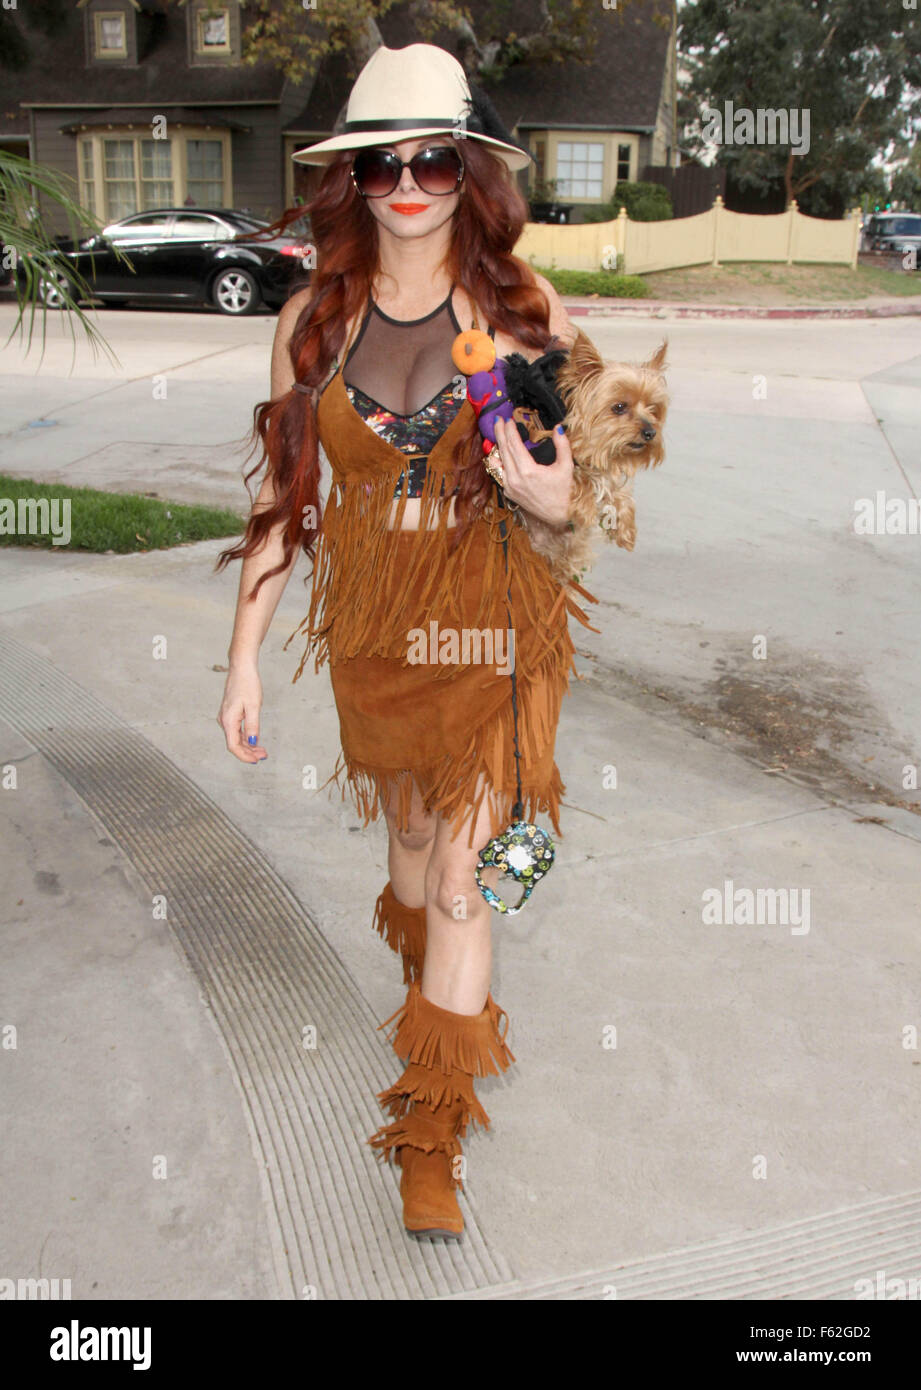 Phoebe Price wears a Pocahontas-like outfit while walking her dog Henry  Featuring: Phoebe Price Where: Los Angeles, California, United States When: 05 Oct 2015 Stock Photo